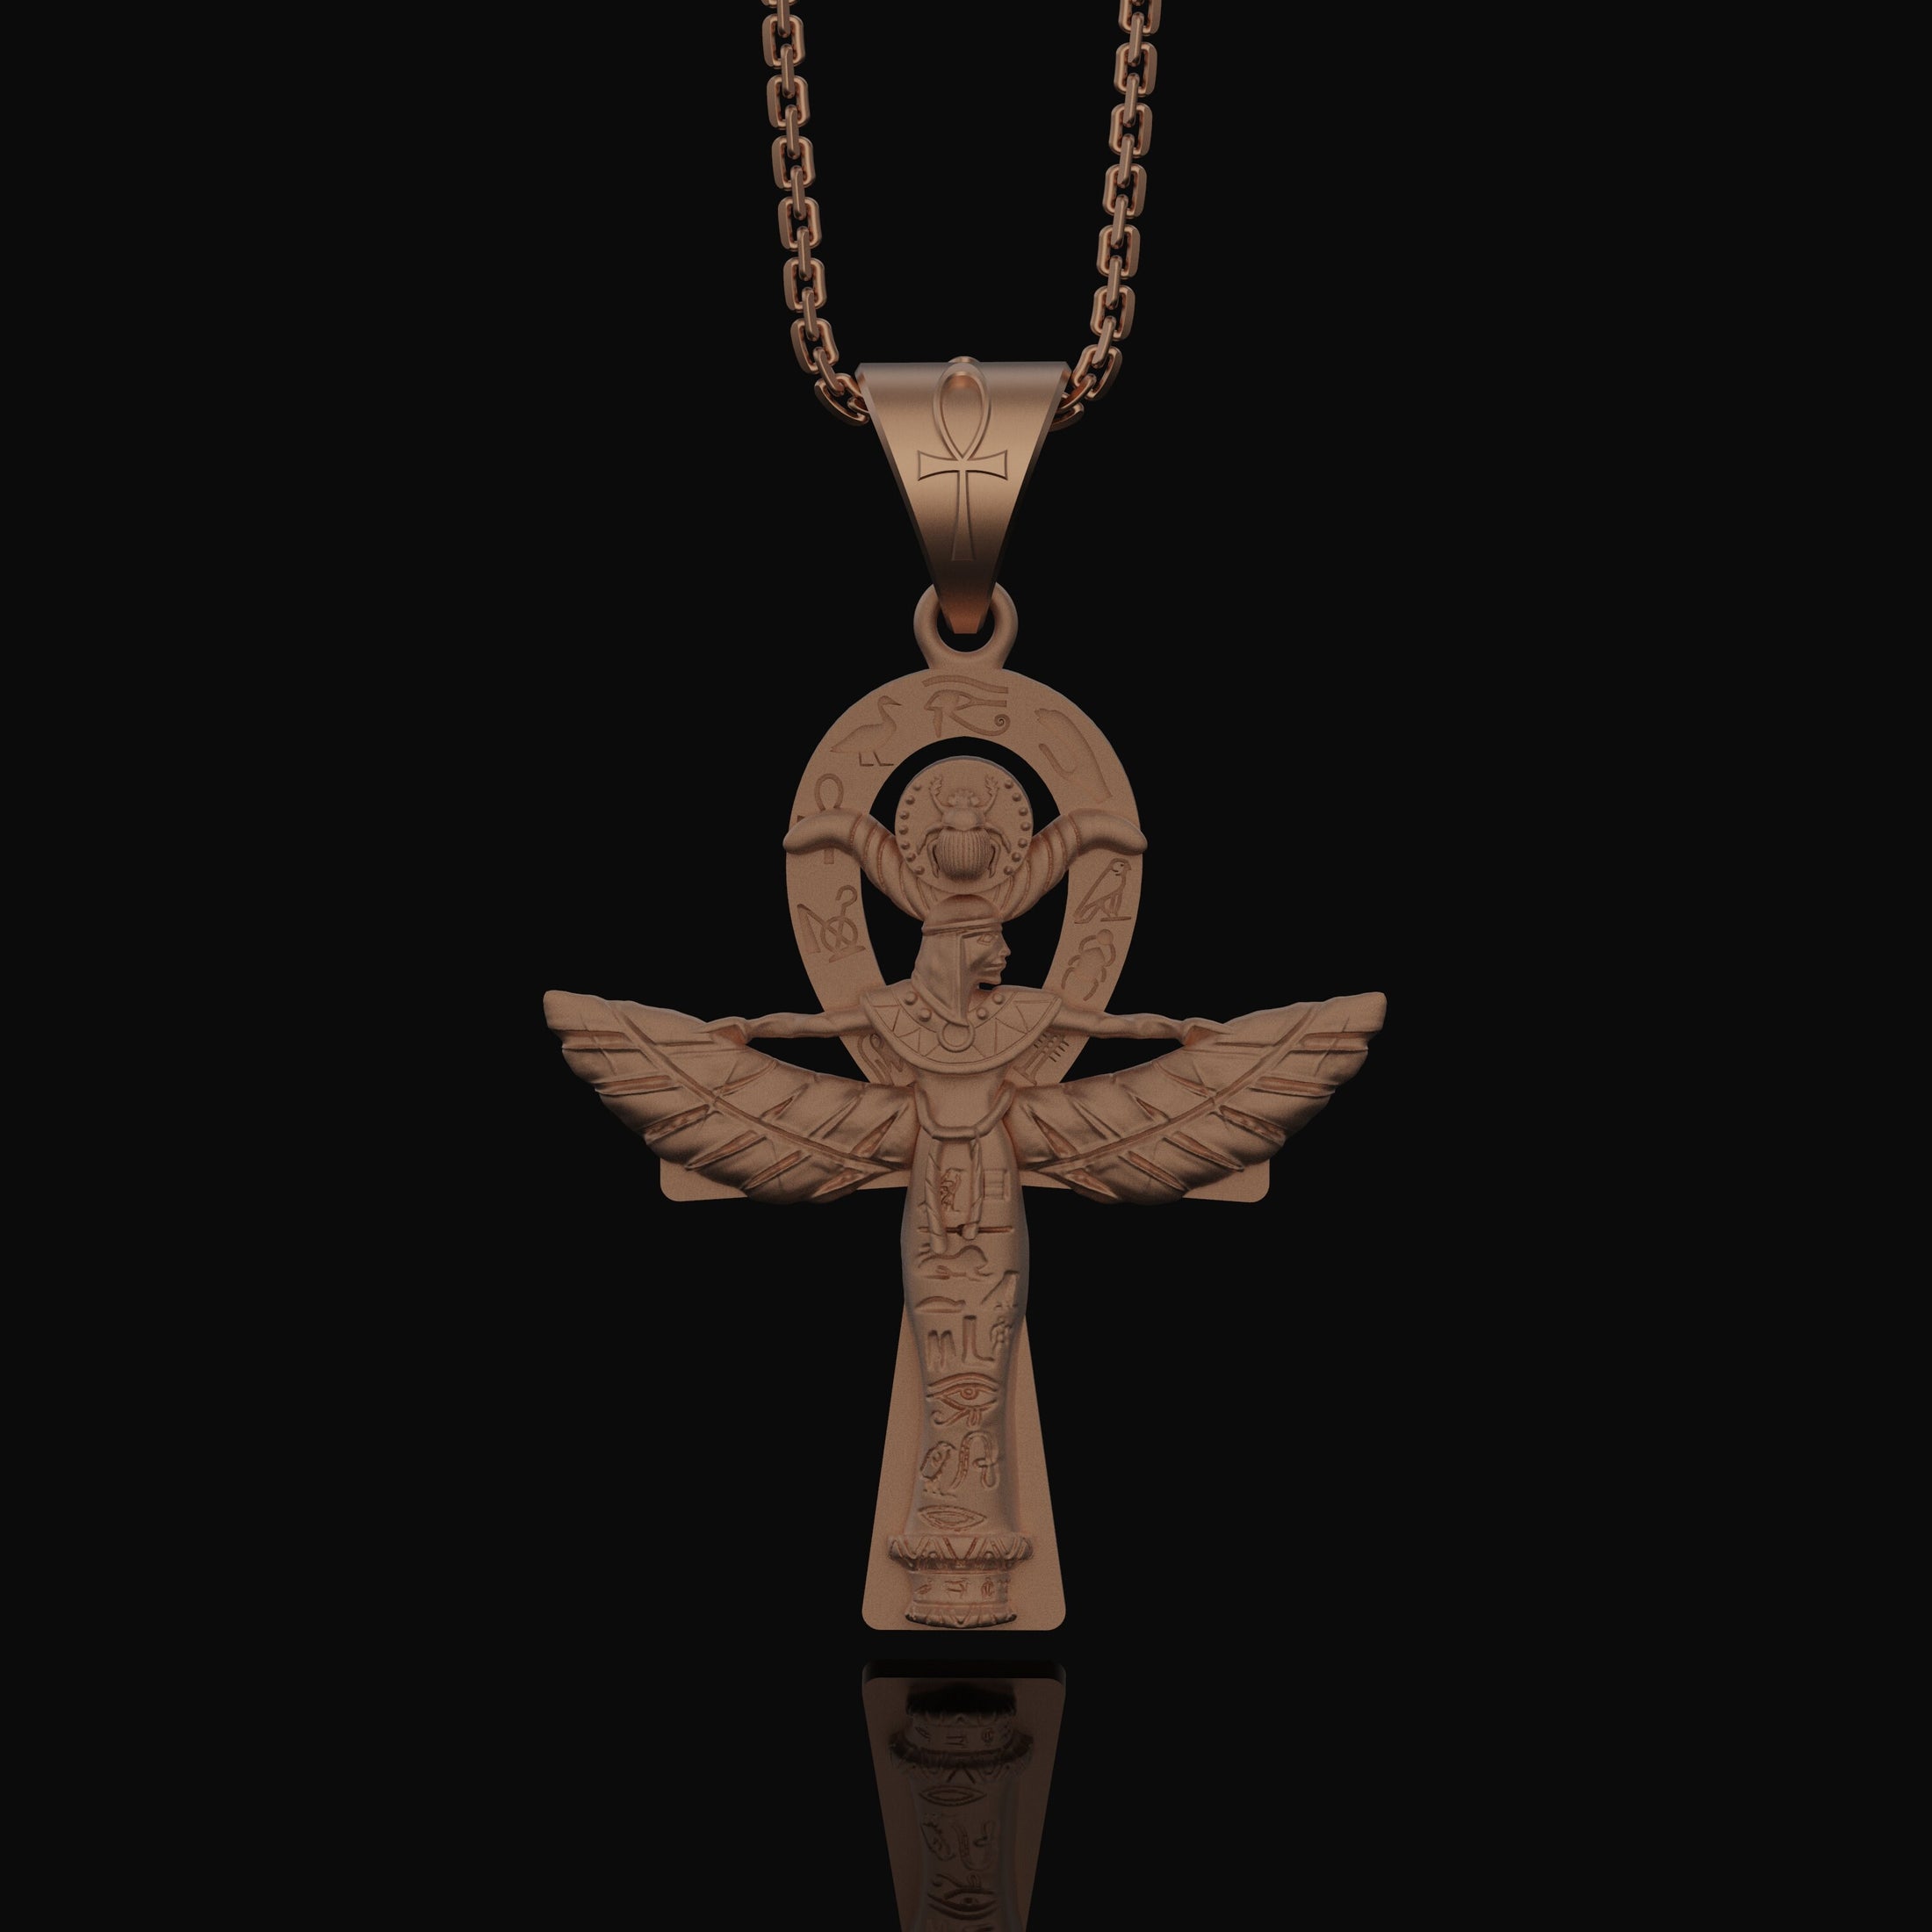 Silver Isis Necklace, Egyptian Goddess Charm, Hieroglyphic Ankh Pendant, Symbol of Life & Magic, Ancient Egypt Jewelry Rose Gold Matte